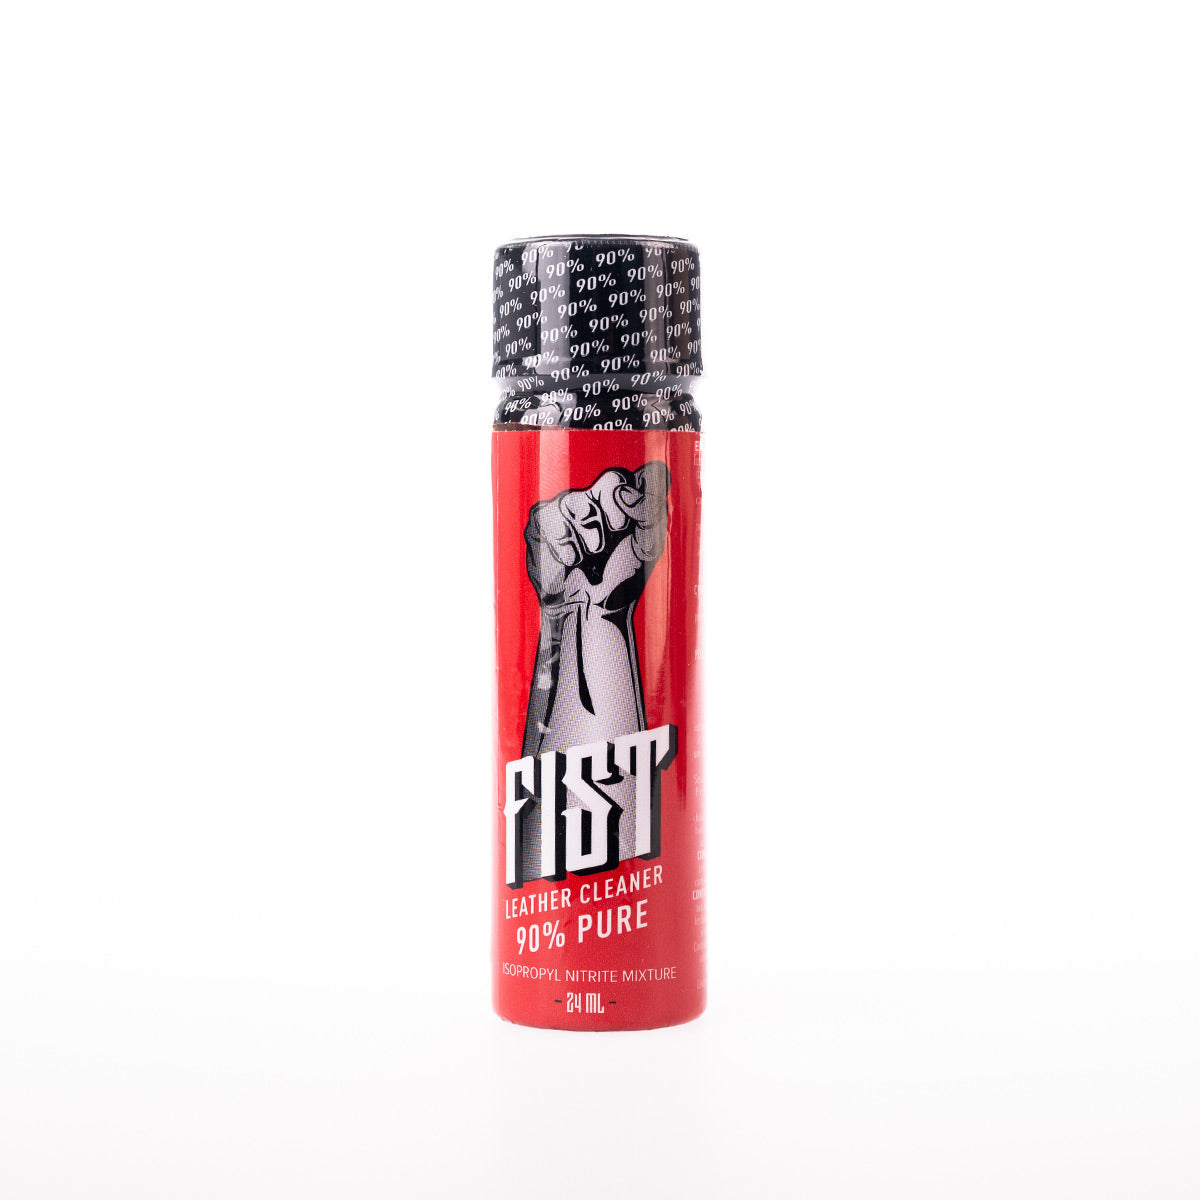 Fist Propyl 24ml, POPPERS UK, POPPERS USA, FREE DELIVERY, NEXT DAY DELIVERY